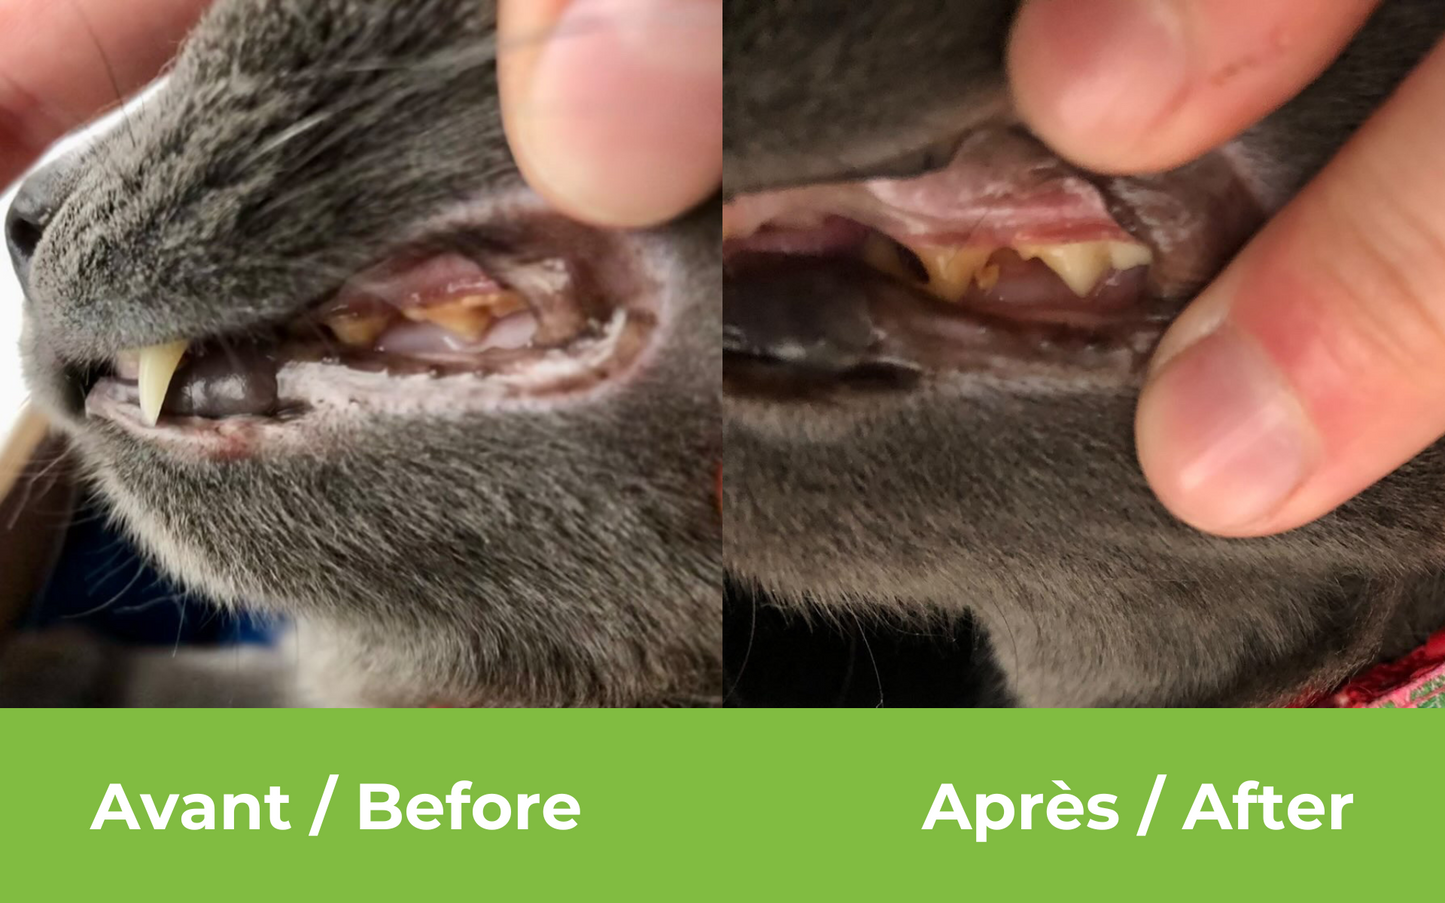 Dental Care for dogs and cats less than 15 kg